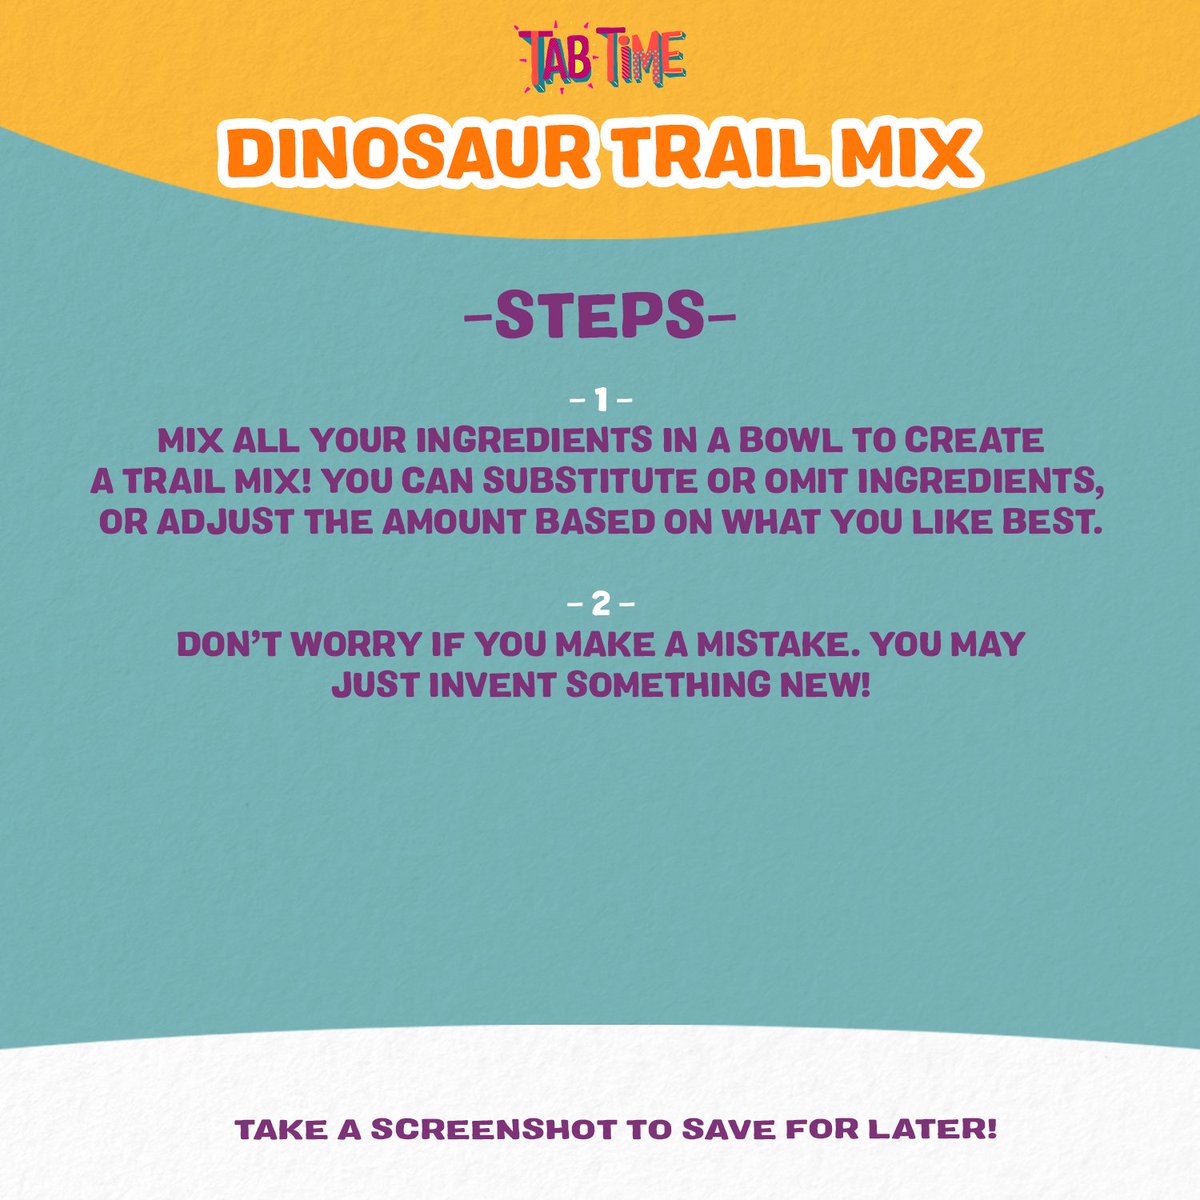 The upside to making a mistake in the kitchen is that you might just end up discovering a tasty new treat! Get creative with this super simple snack and see what kind of trail mix you can mix up! 🥜🫐🦖 

#healthysnacks #easysnacks #vegansnacks #kidssnacks #tabtime #tabithabrown